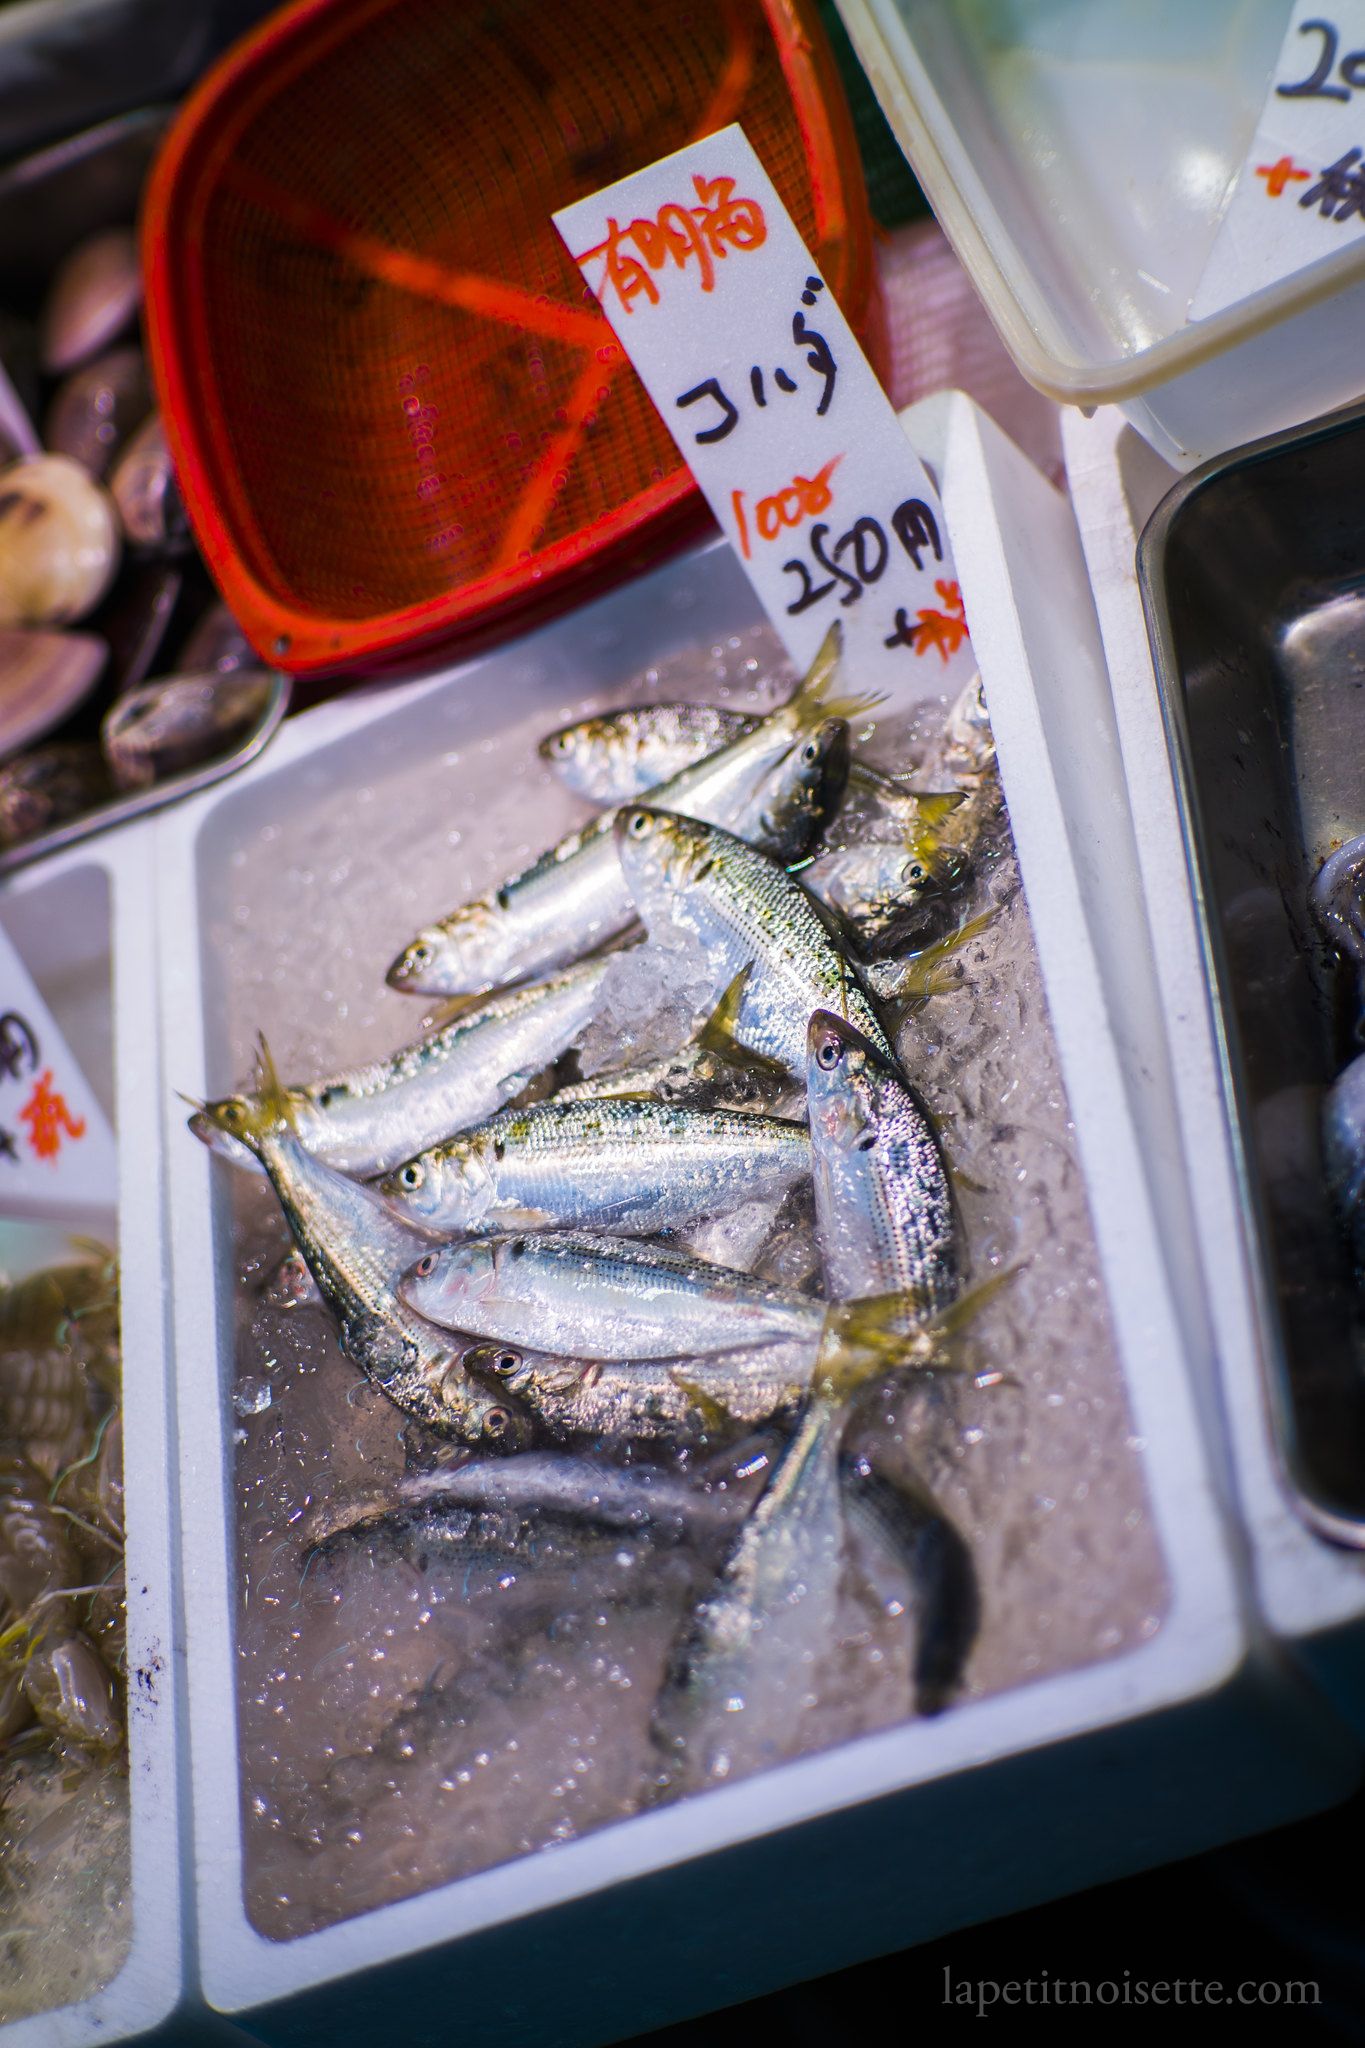 Gizzard Shad being sold at a fish market in Japan.